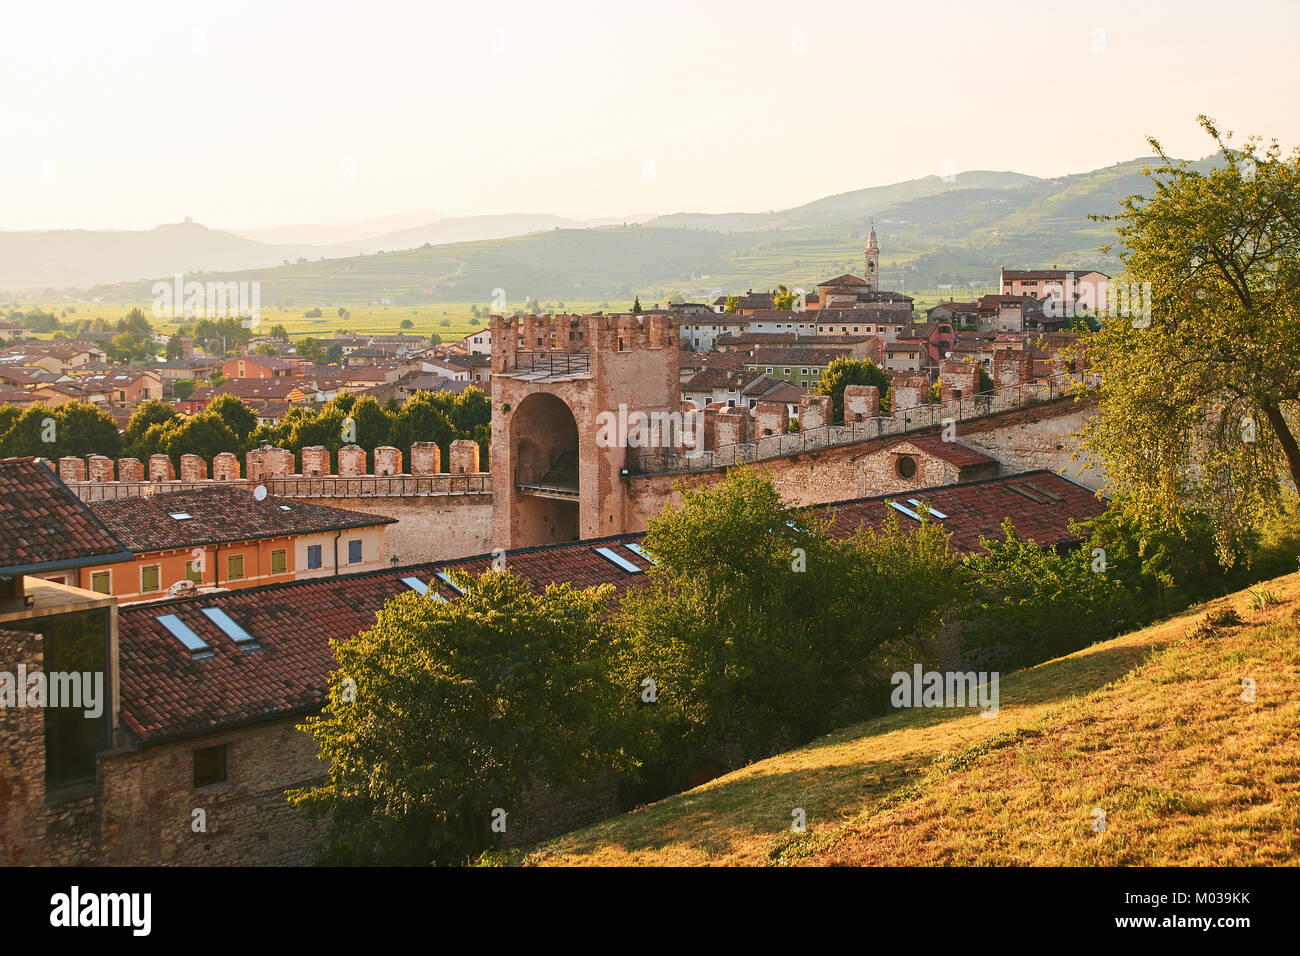 View of beautiful medieval town of Soave, Italy from the castle hill Stock Photo